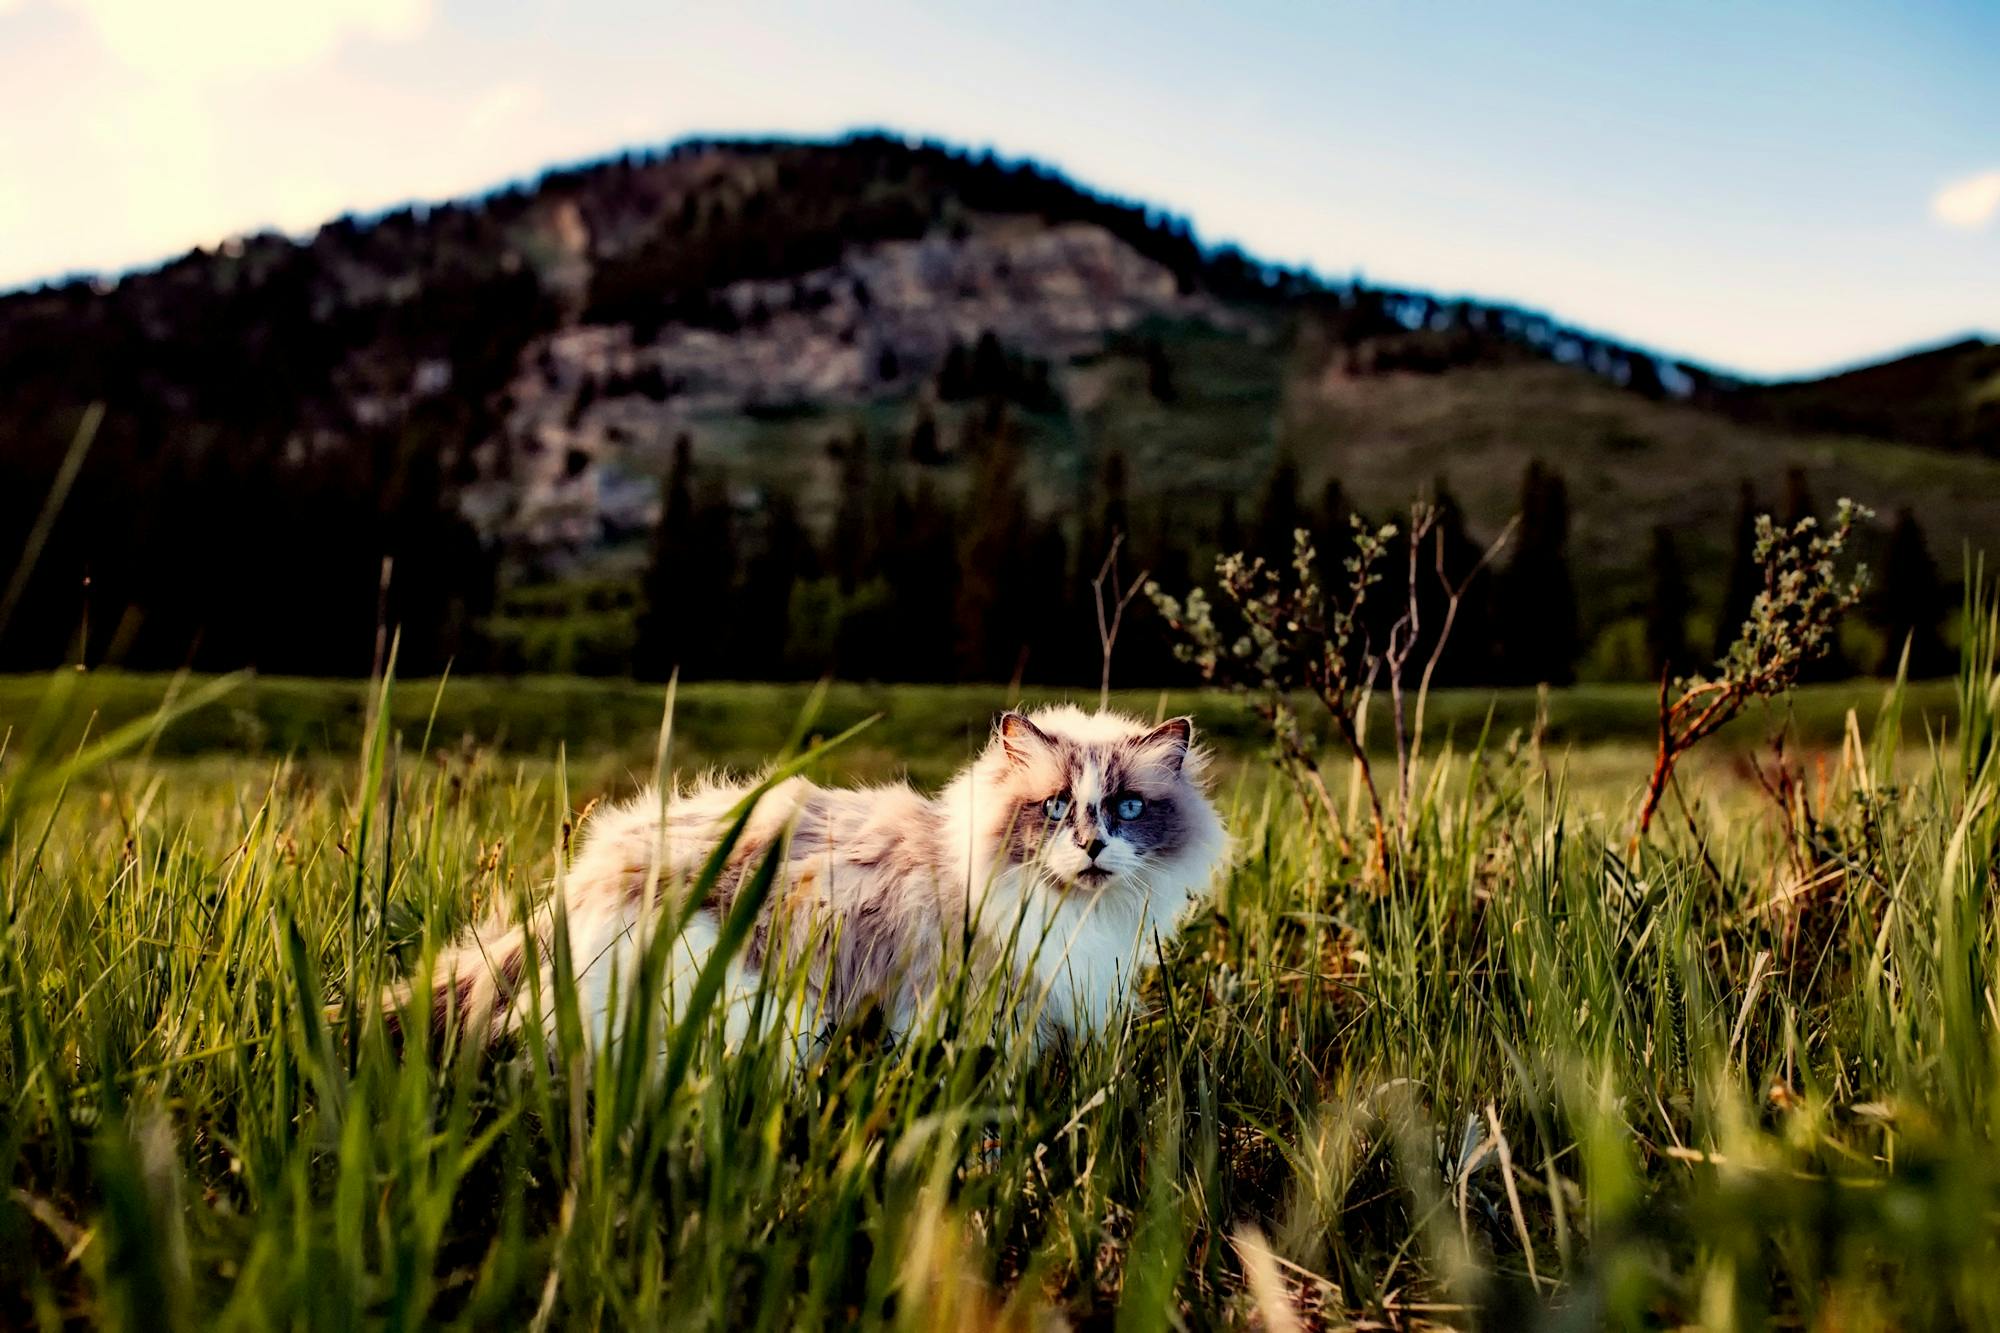 A cat on a field of grass. | Photo: Pexels